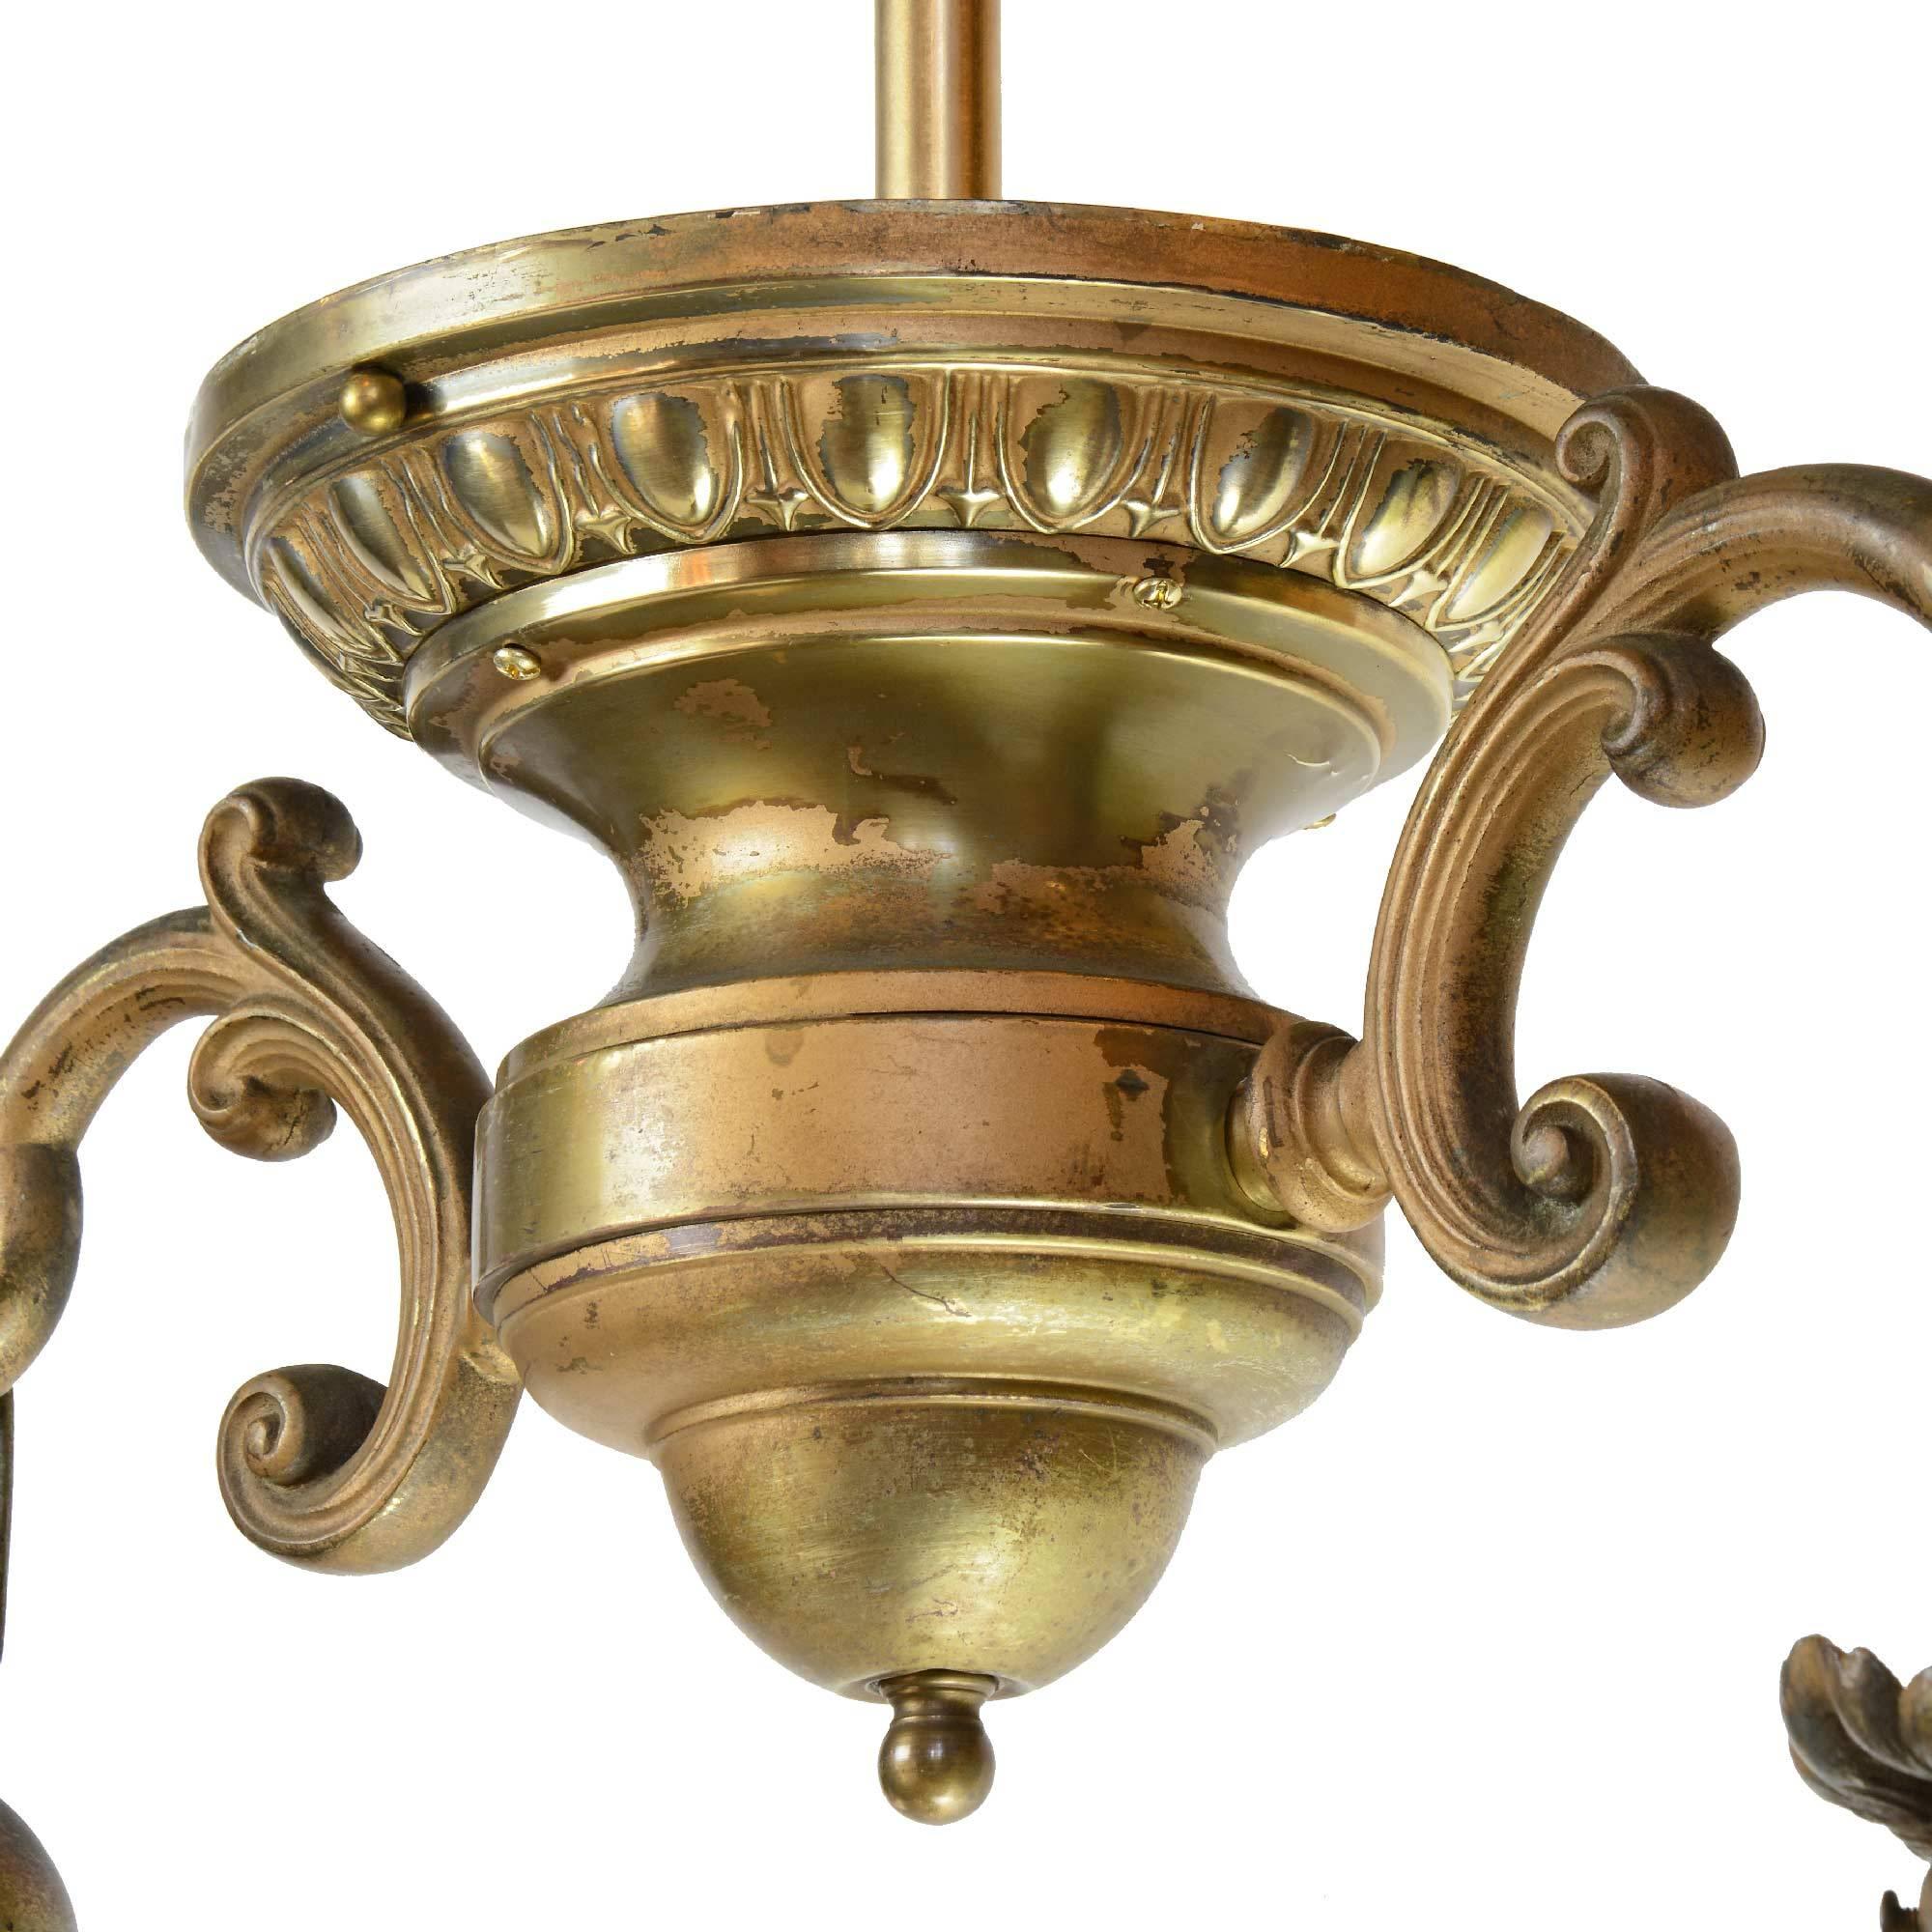 This brass fixture features two decorative arms with leafy fitters holding iridescent cut-glass antique shades, and a unique urn-shaped body with egg and dart detail, attributed to the Charles Polacheck & Brothers Company of Milwaukee,